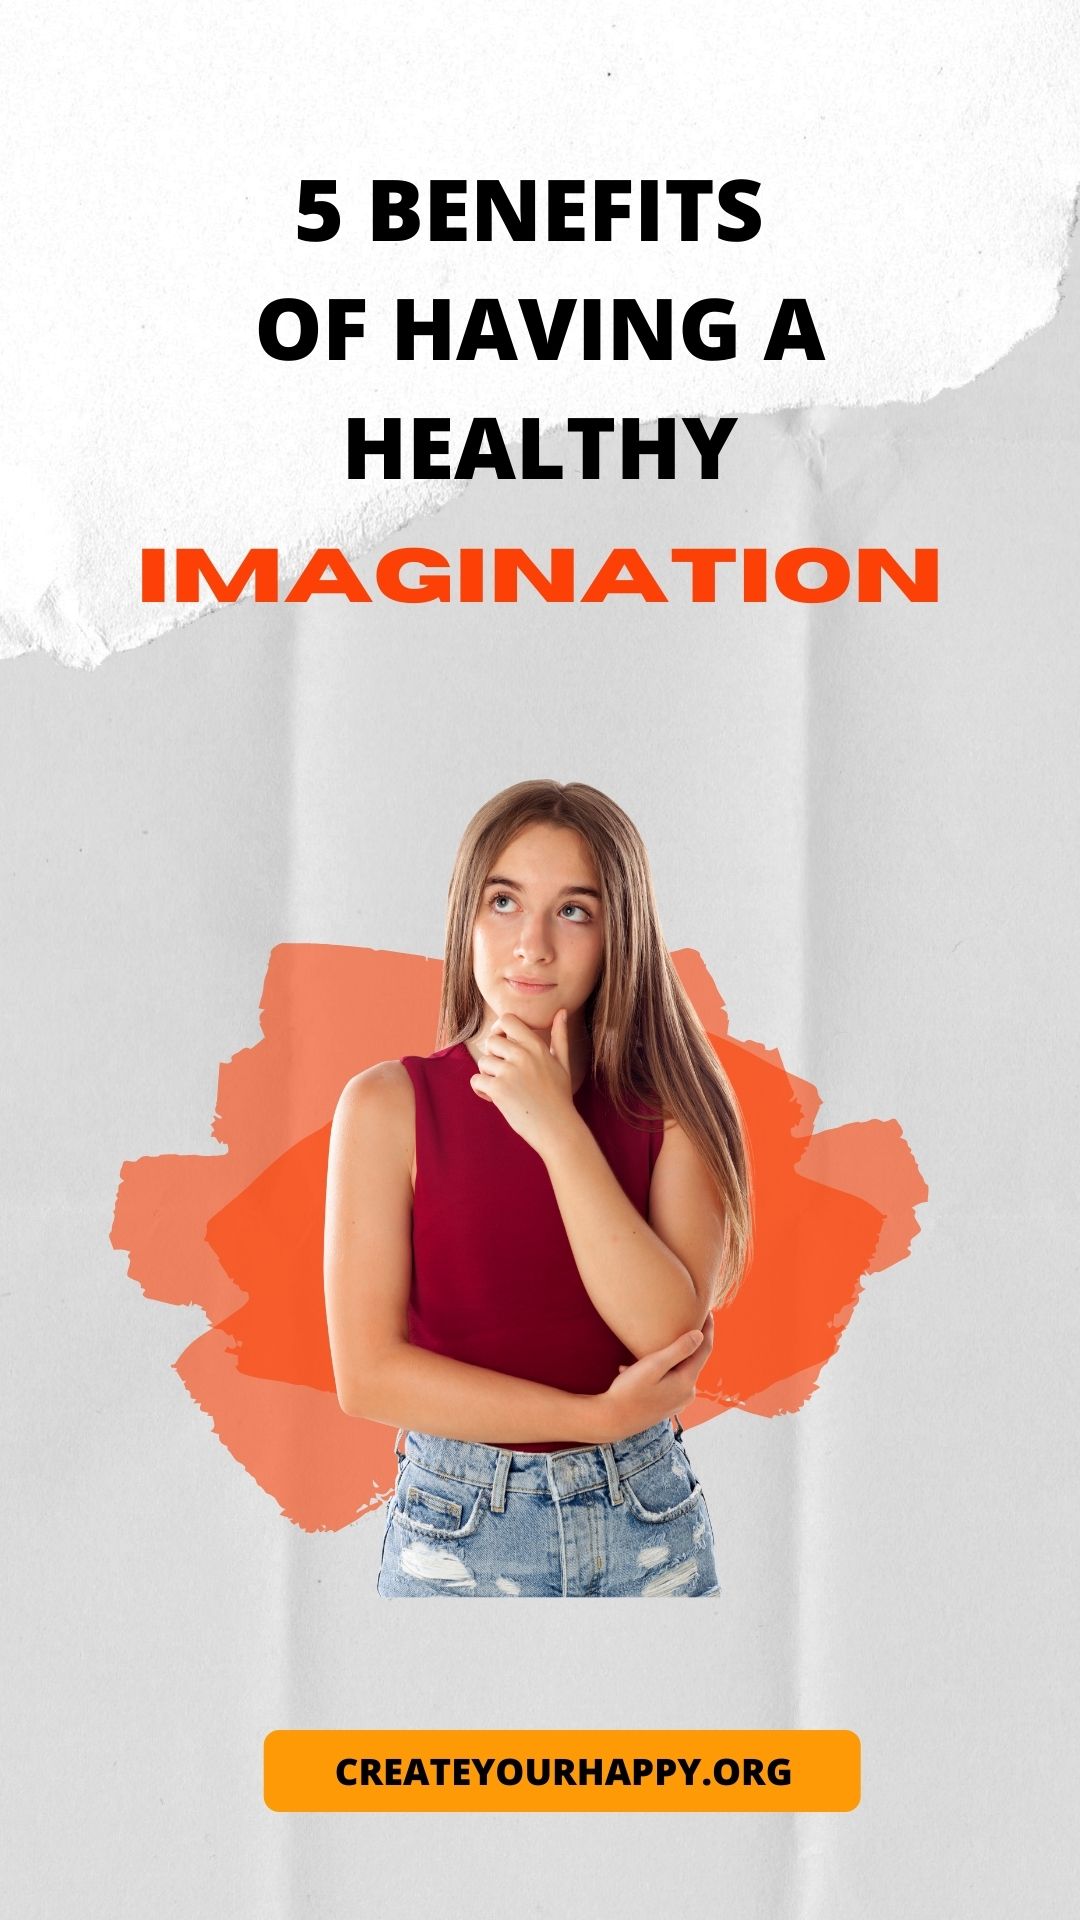 5 Benefits of Having a Healthy Imagination